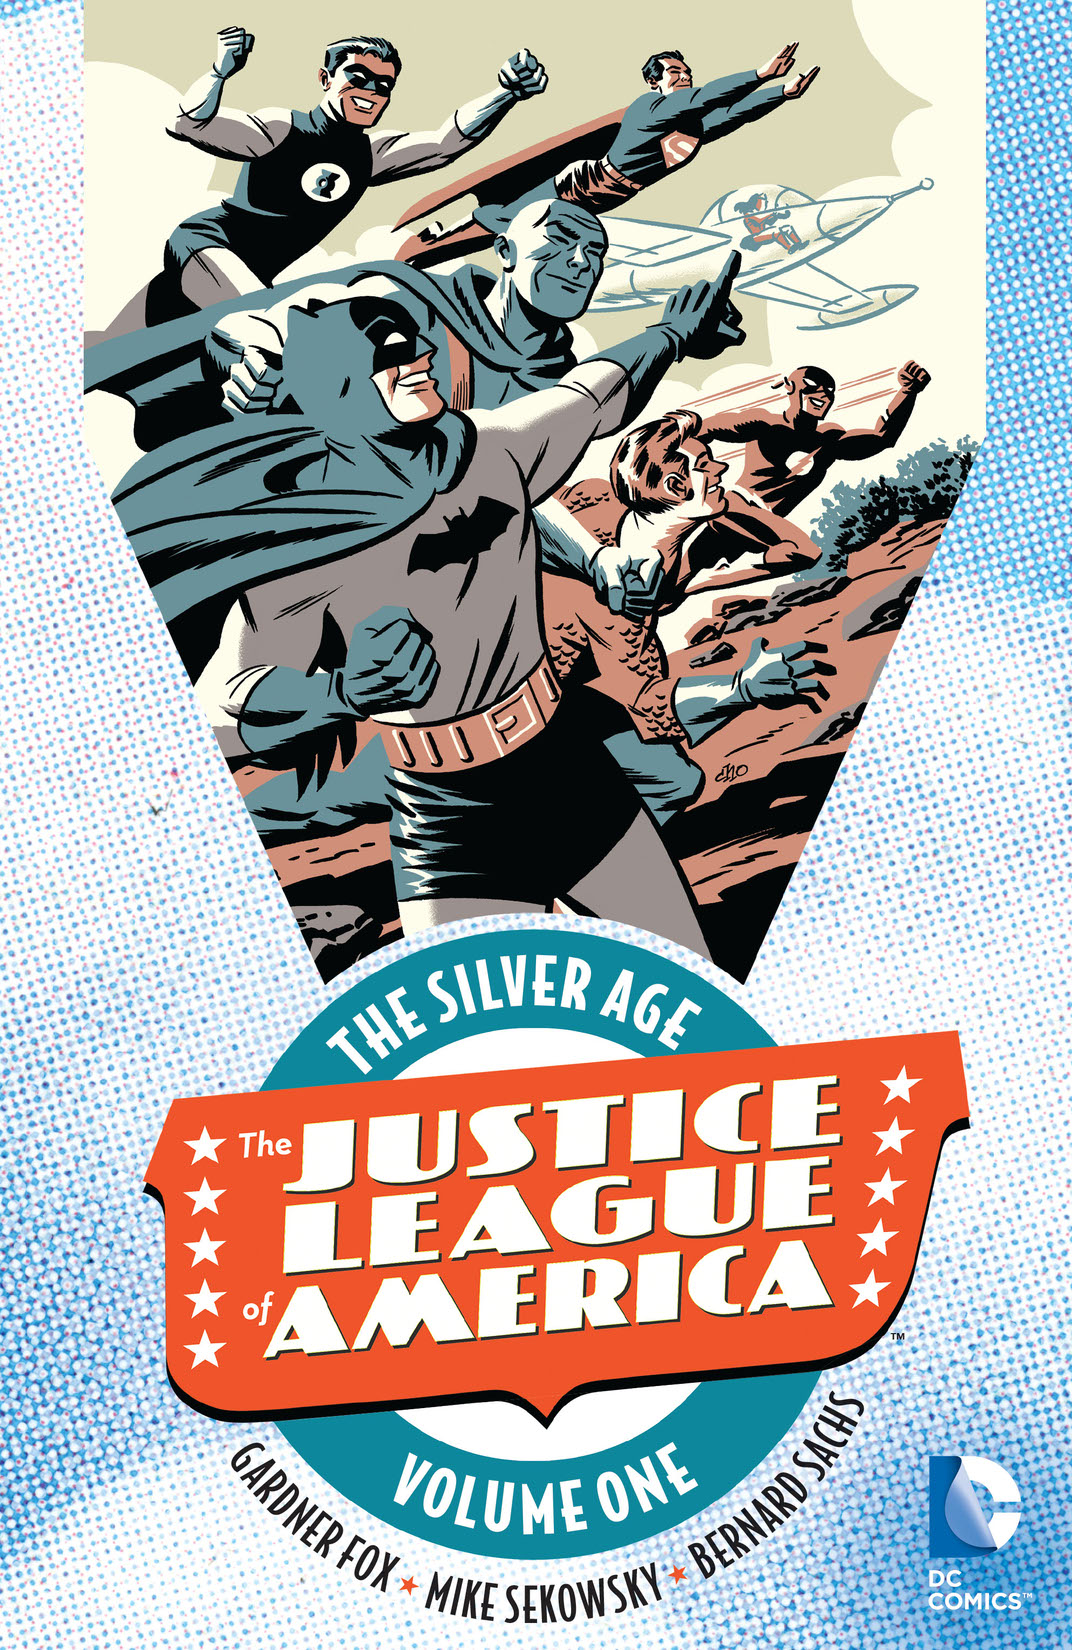 Justice League of America: The Silver Age Vol. 1 preview images